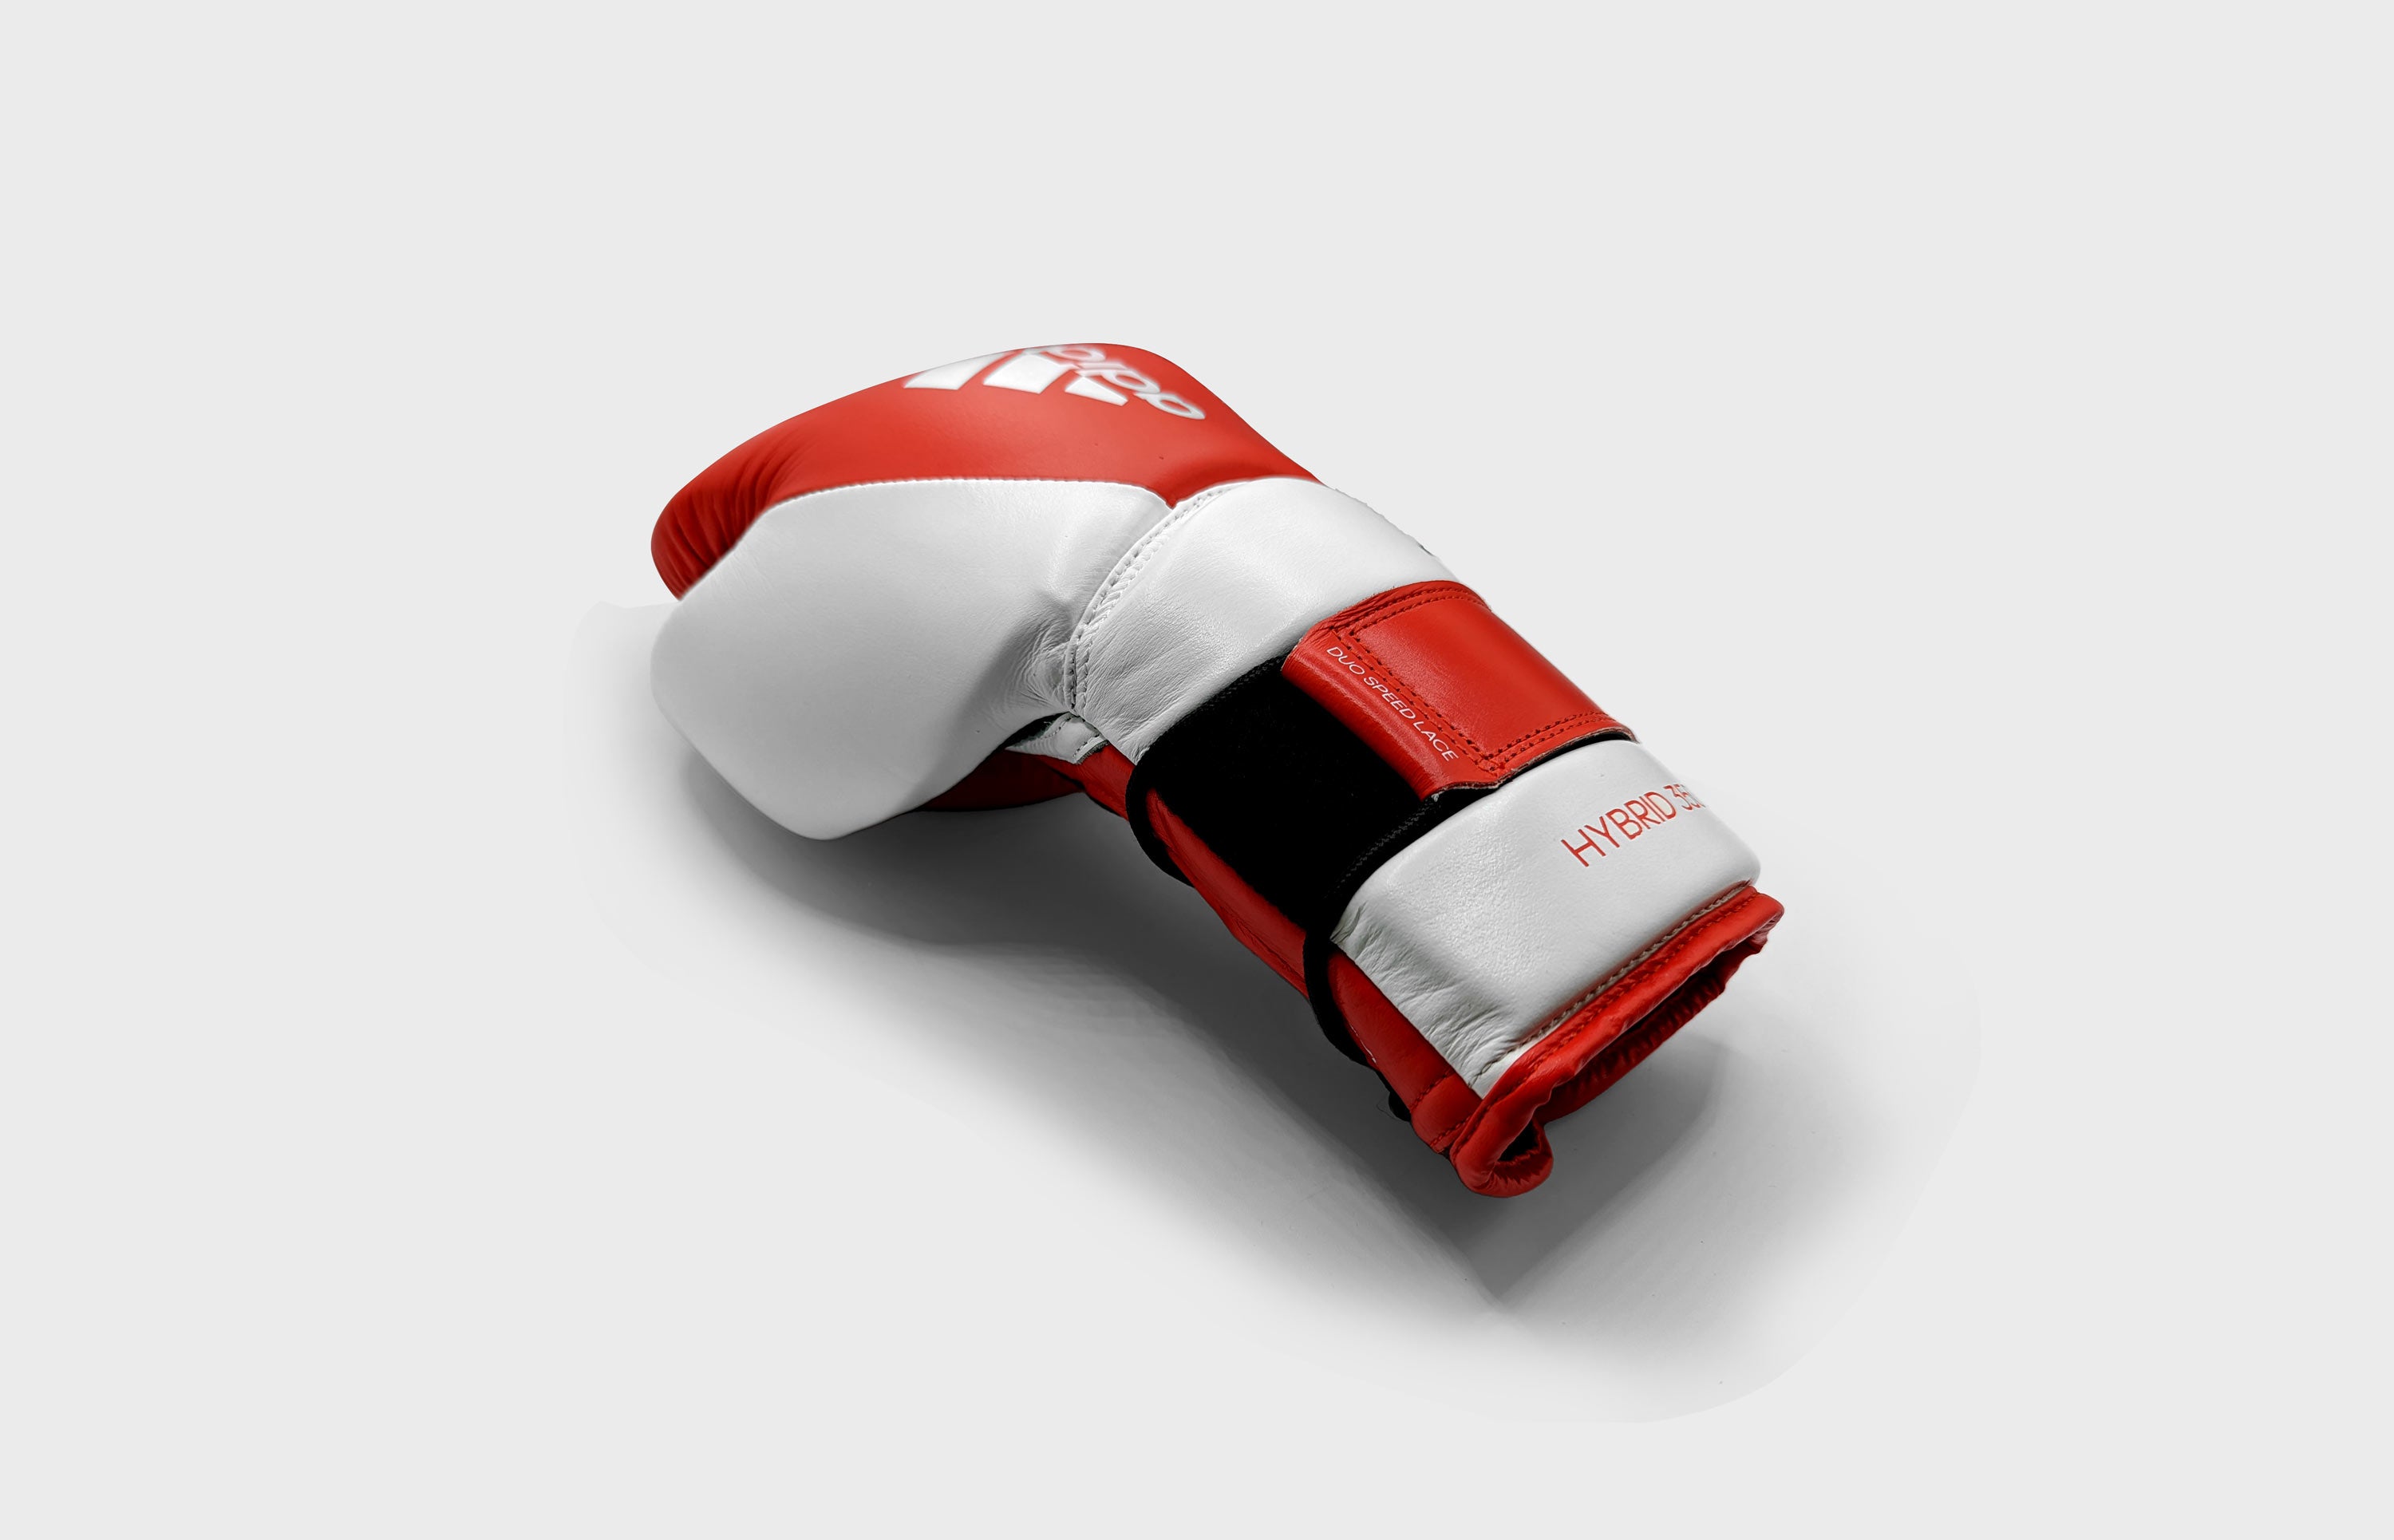 Adidas Hybrid 350 Elite Boxing Gloves in red, available at ATL Fight Shop